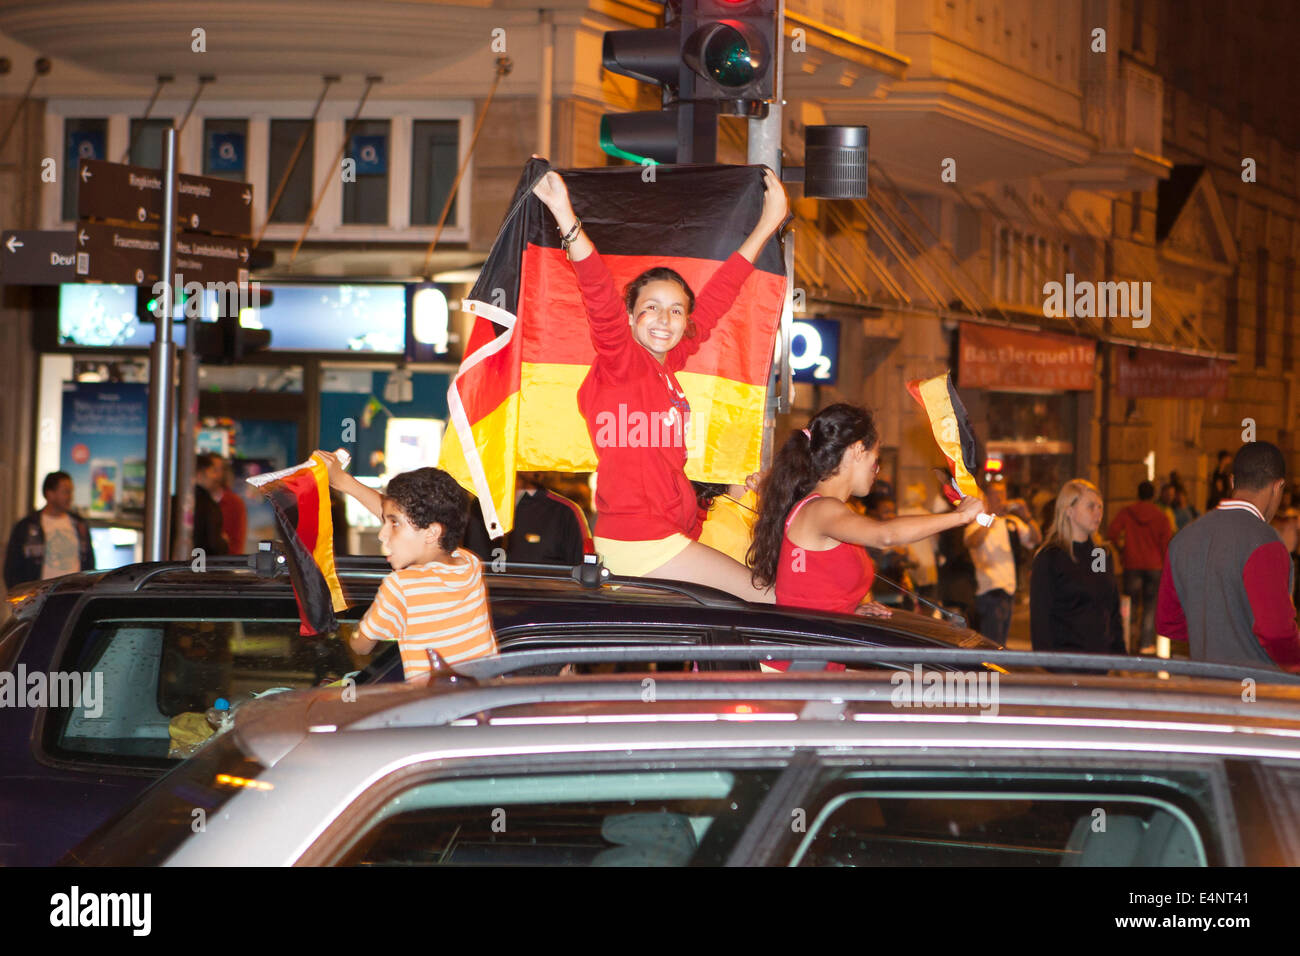 Wiesbaden, Germany. 14th July, 2014. Germany wins the FIFA World Cup 2014. People in their cars cheering and celebrating in downtown Wiesbaden after Germanys victory against Argentina in the final match. Some motion blur. Credit:  Oliver Kessler/Alamy Live News Stock Photo